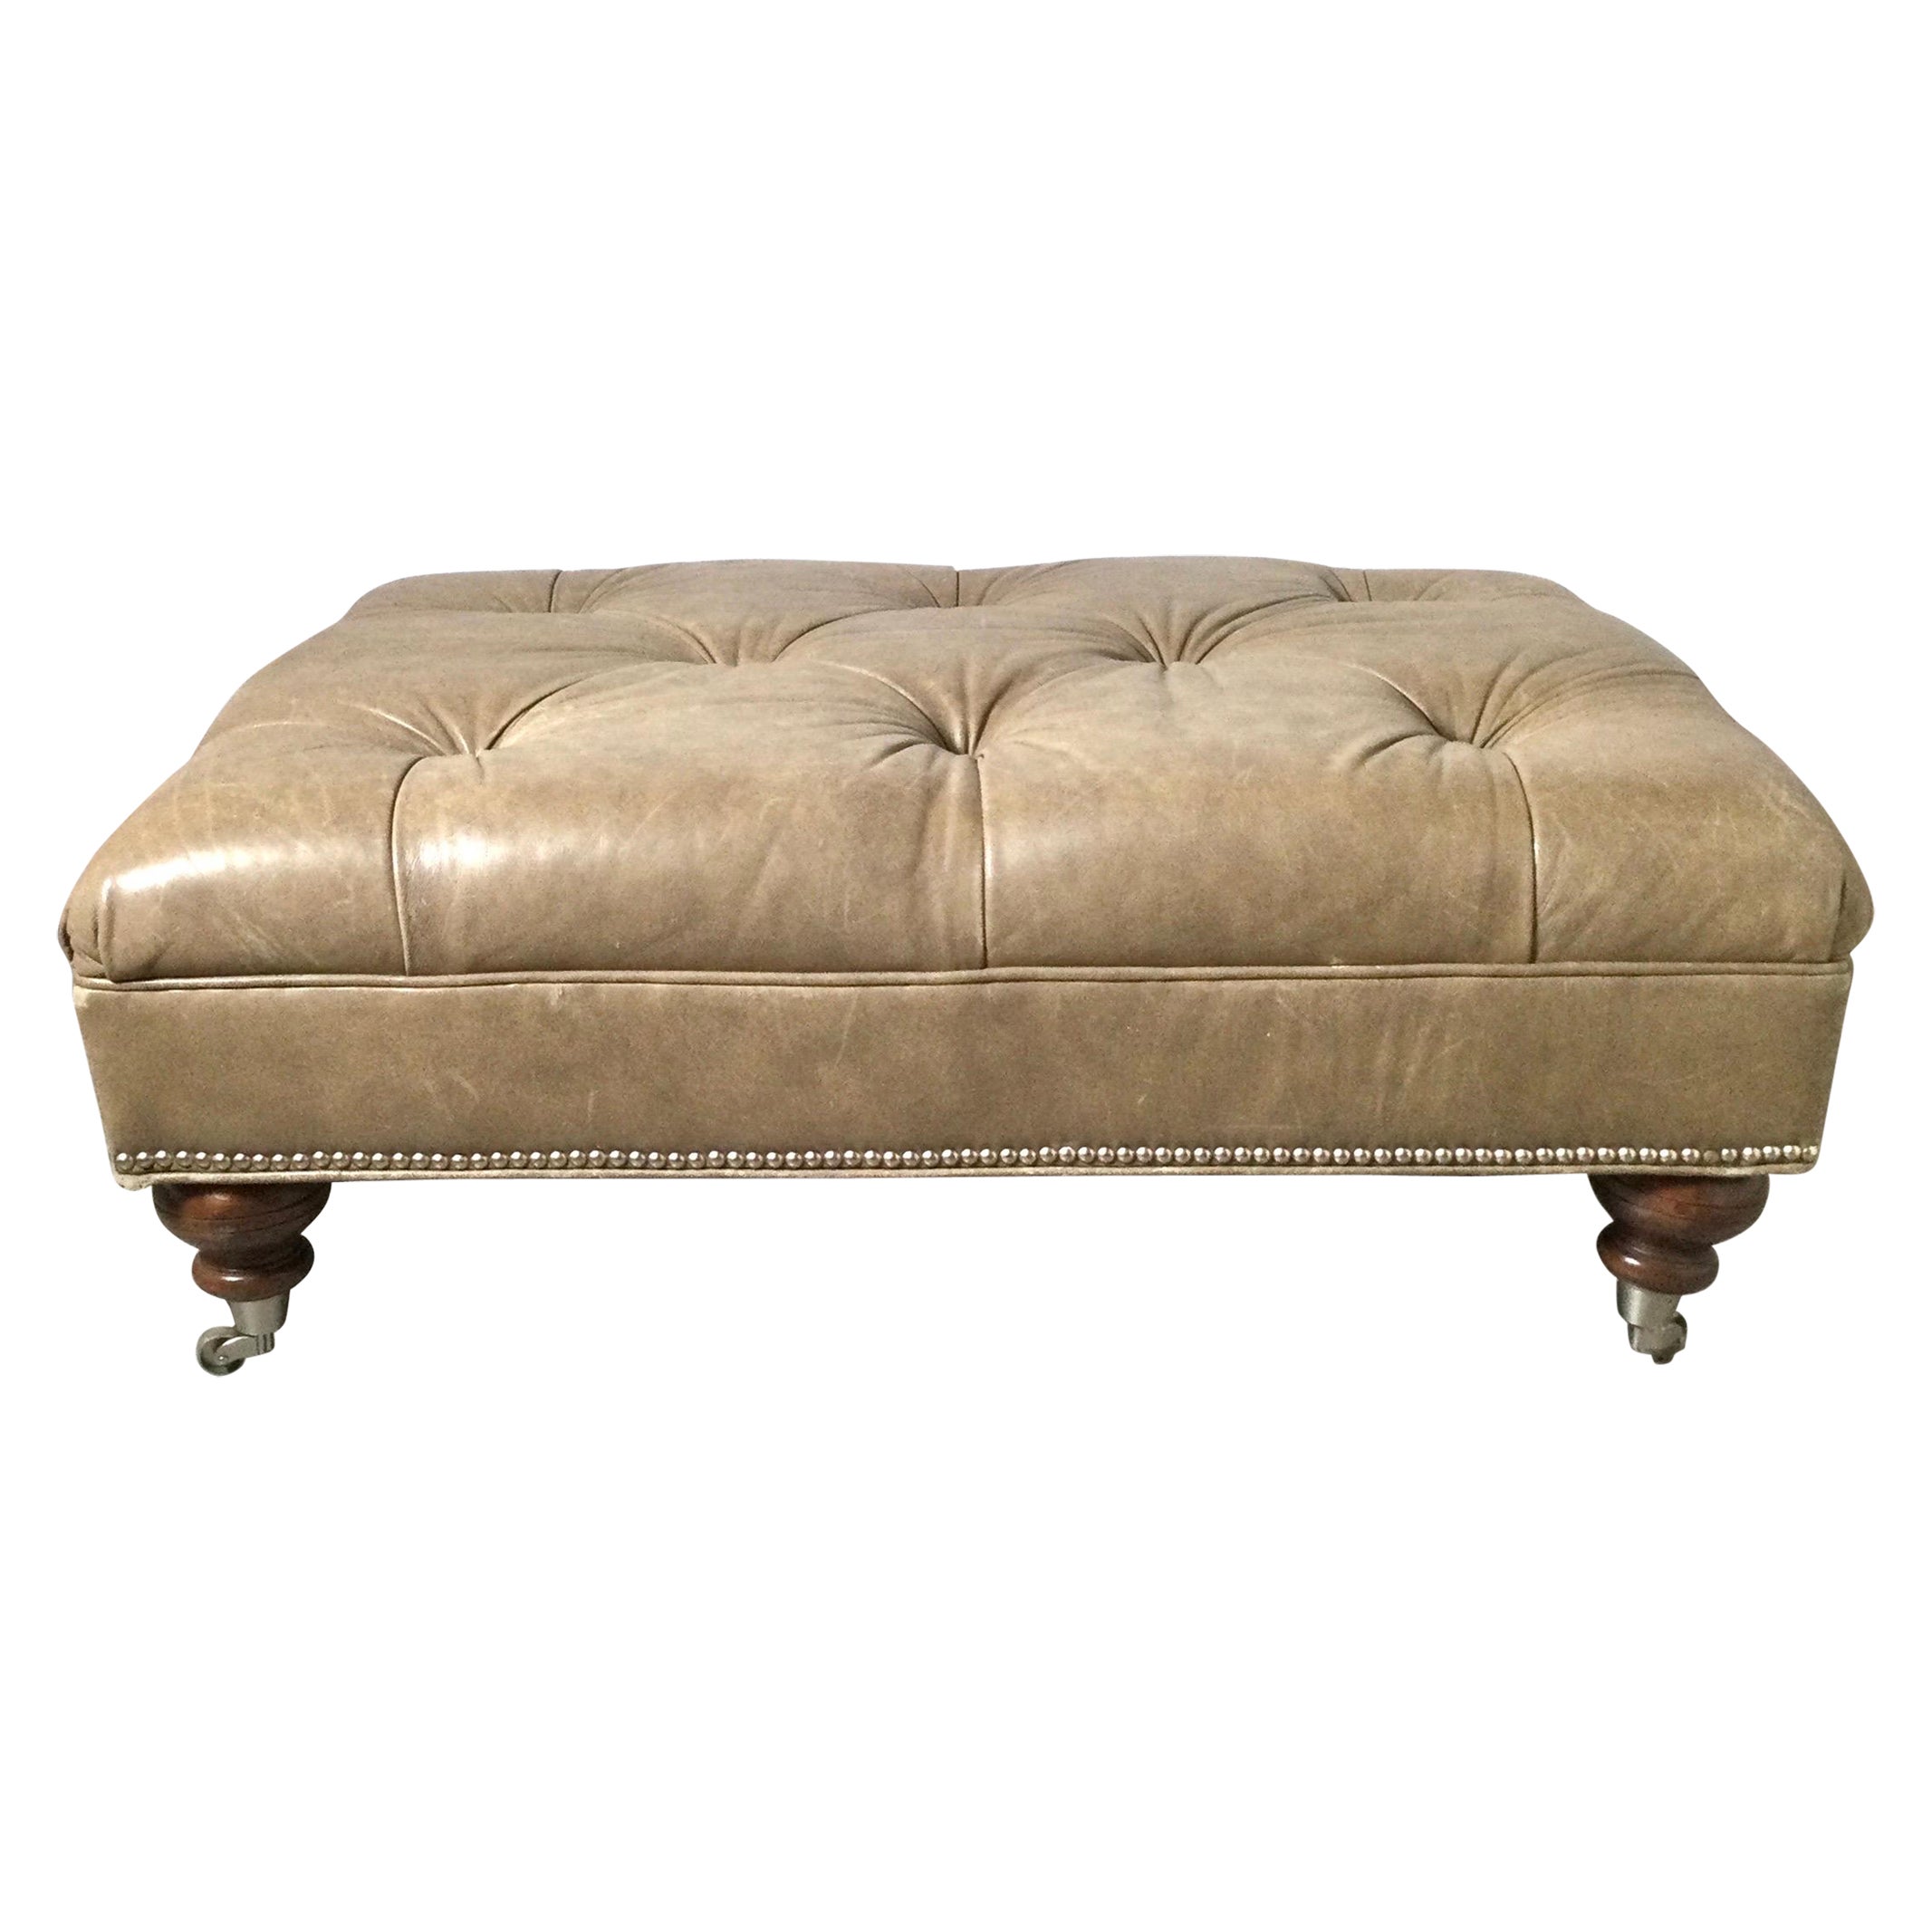 Large Tufted Leather Ottoman Coffee Table